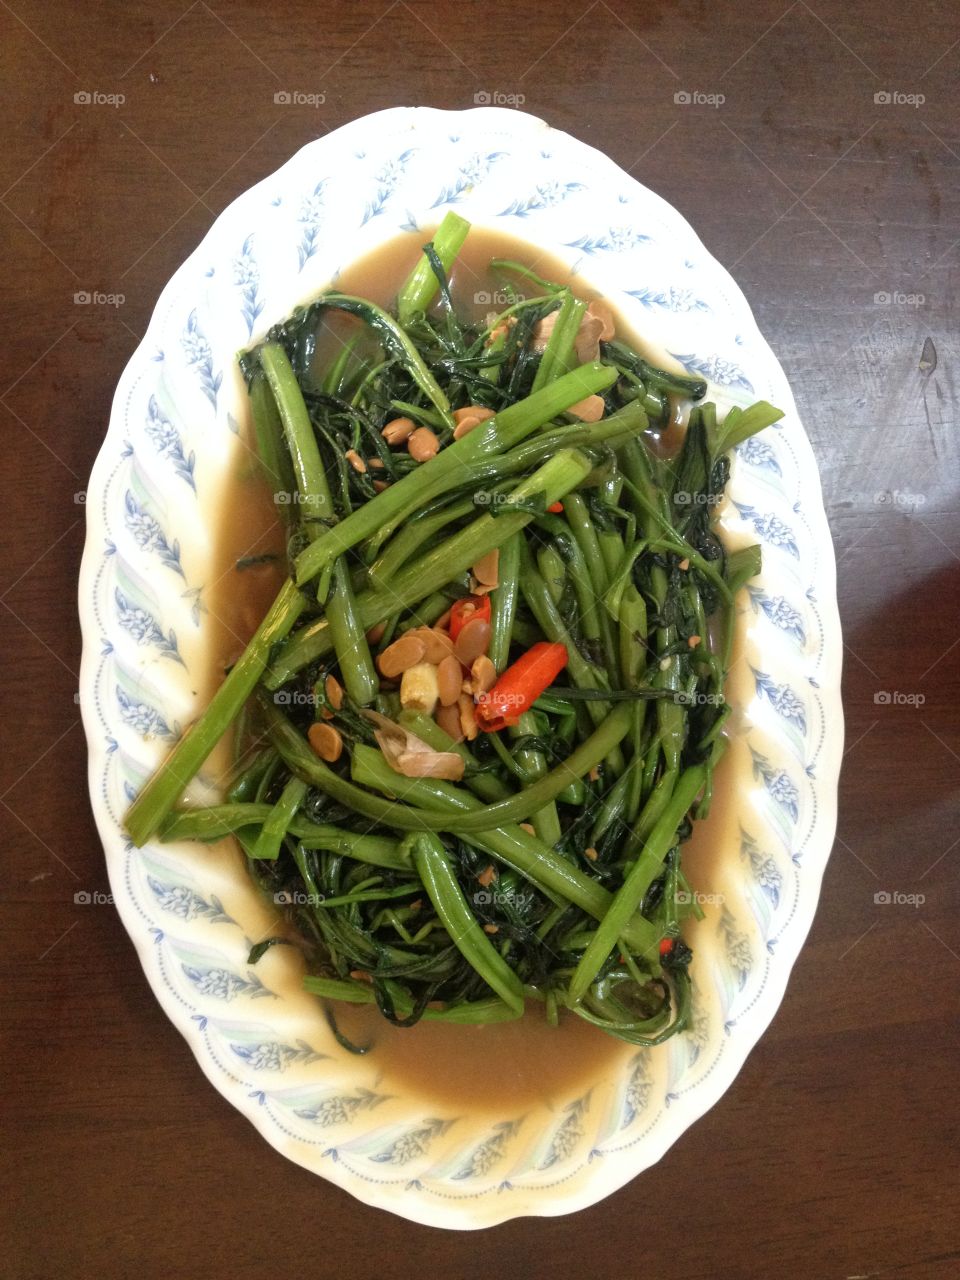 Fried Morning Glory with chillies. High Vitamin A.